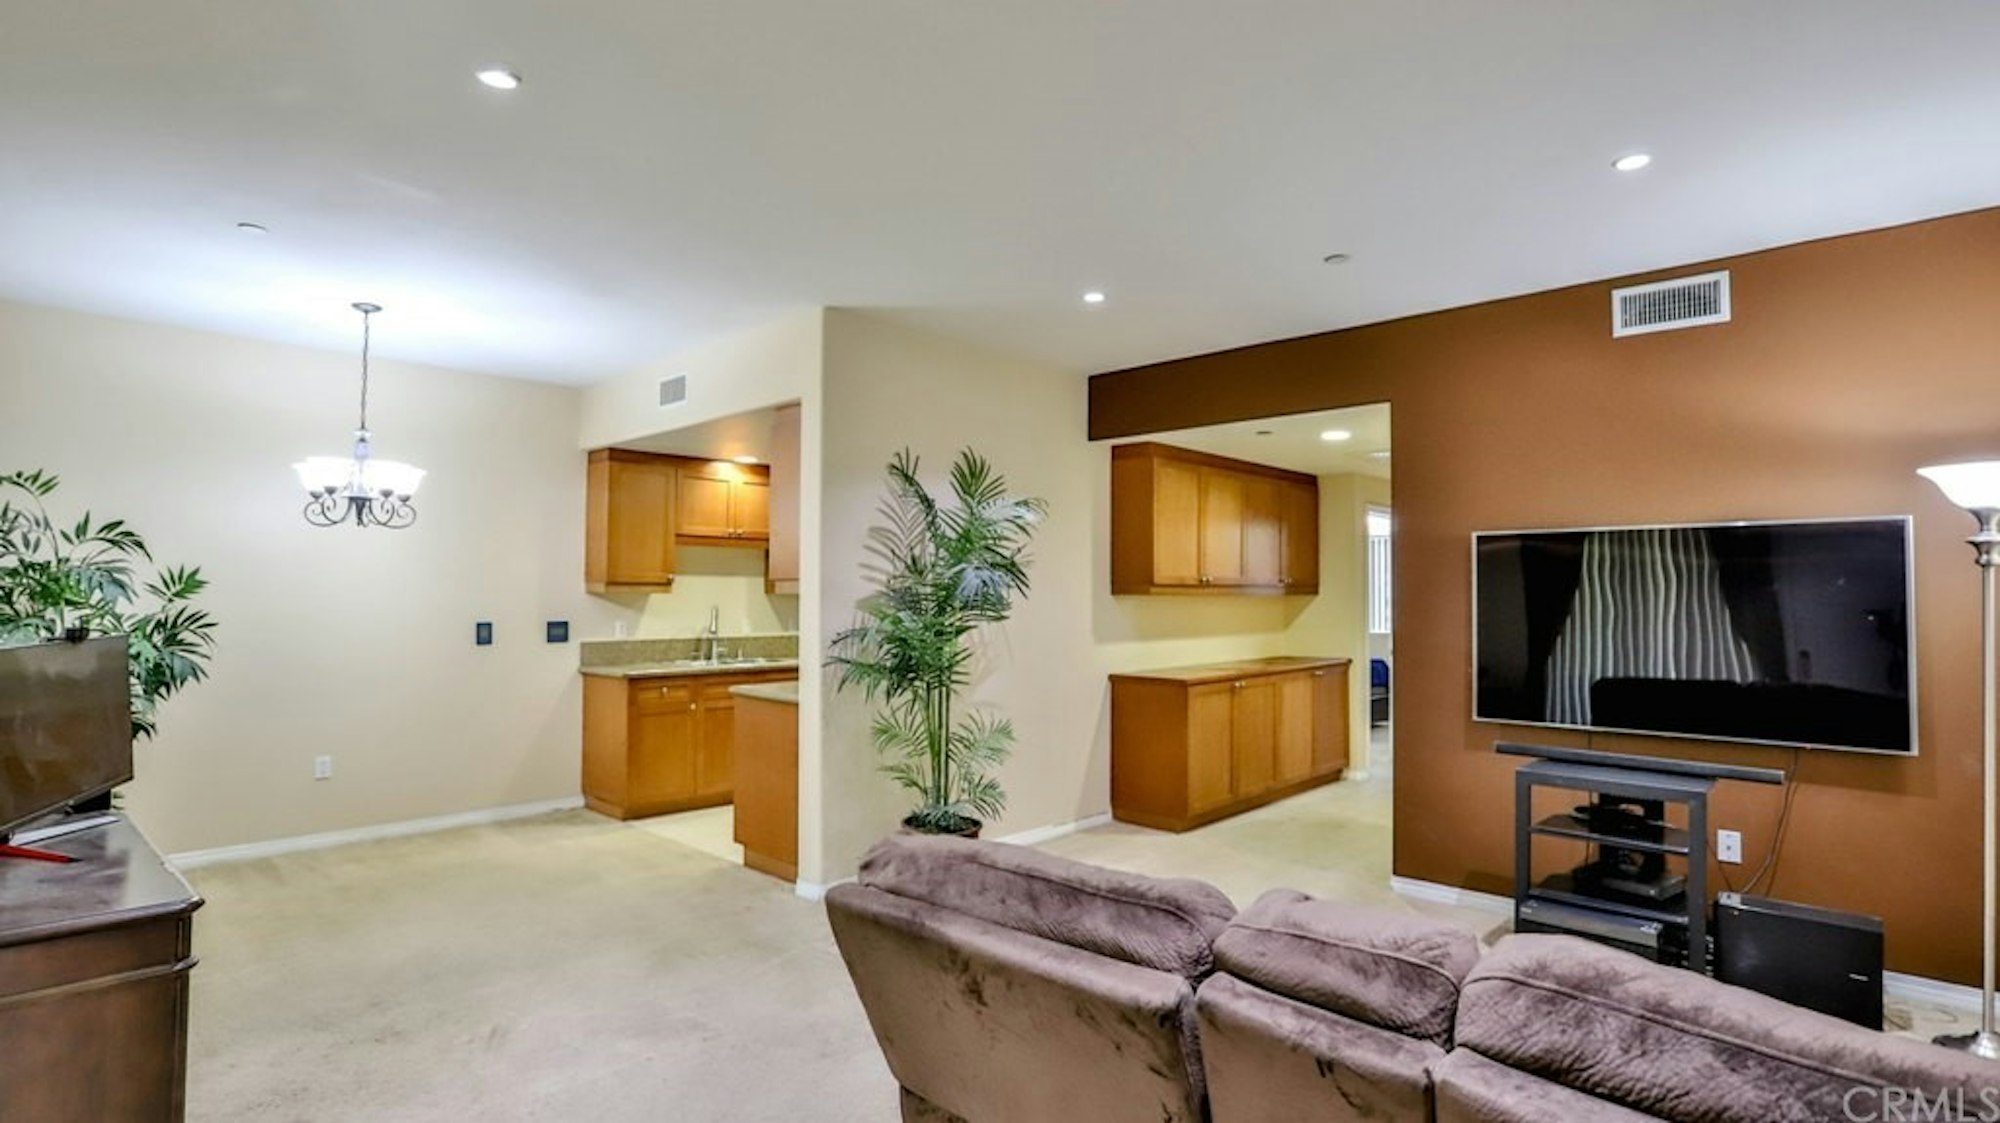 Photo 1 of 16 - 17230 Newhope St #113, Fountain Valley, CA 92708